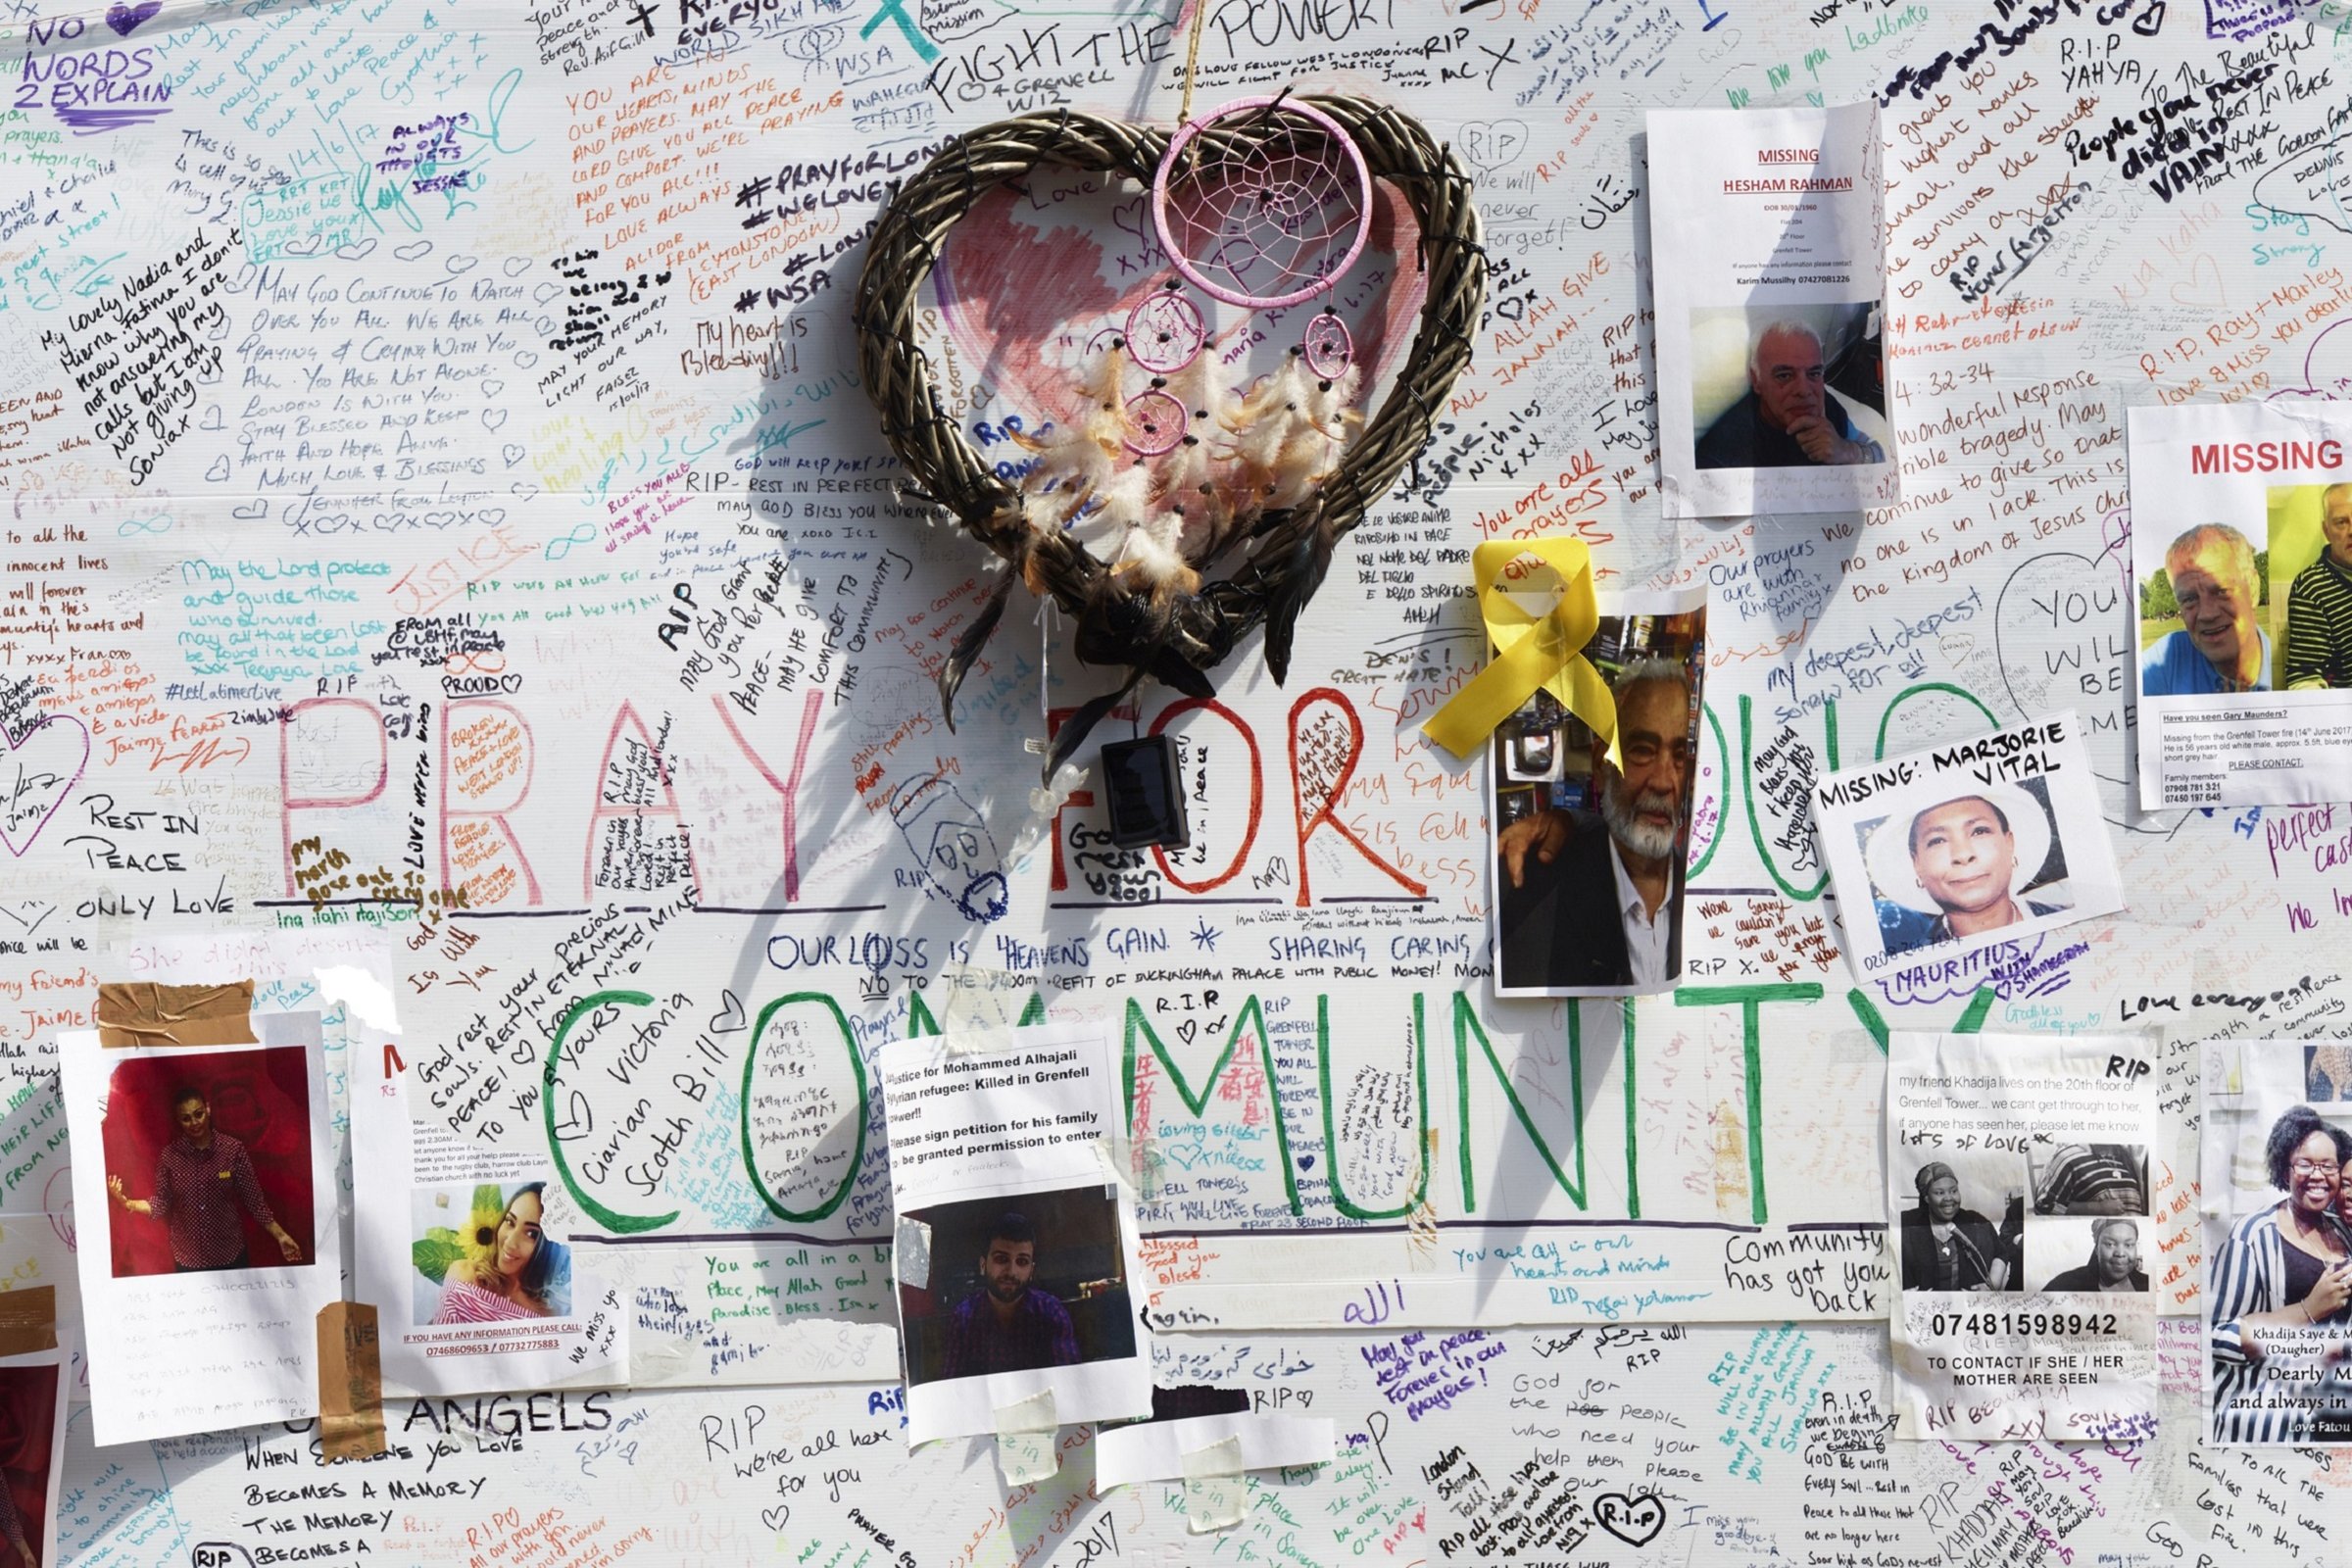 After Grenfell: New research reveals what the faith groups did in response to the Grenfell Fire - and what we can learn from it